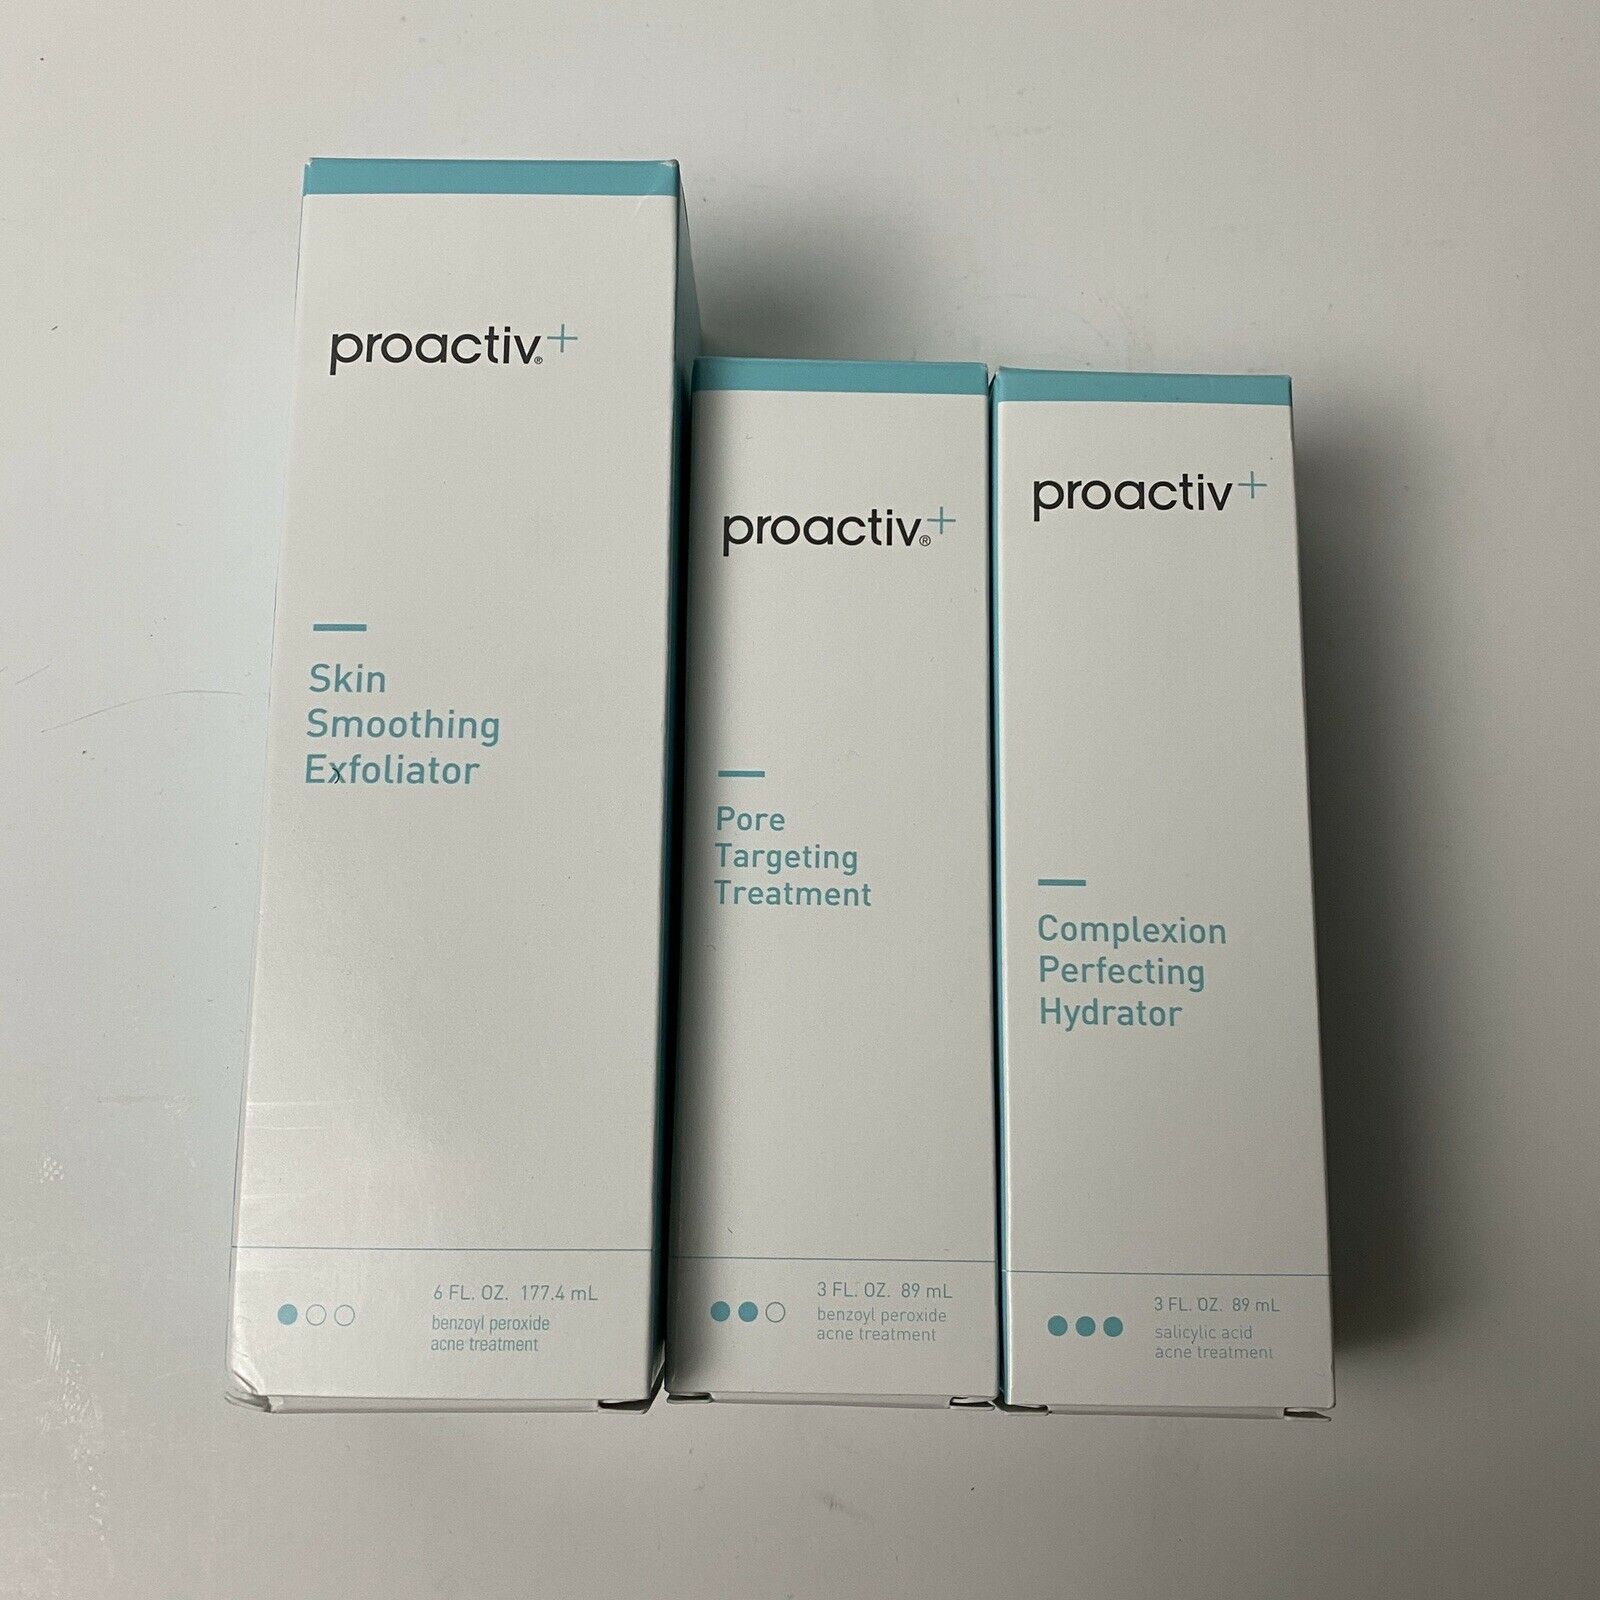 Proactiv Skin Pore Complexion Brand New Sealed Pack - $148.19